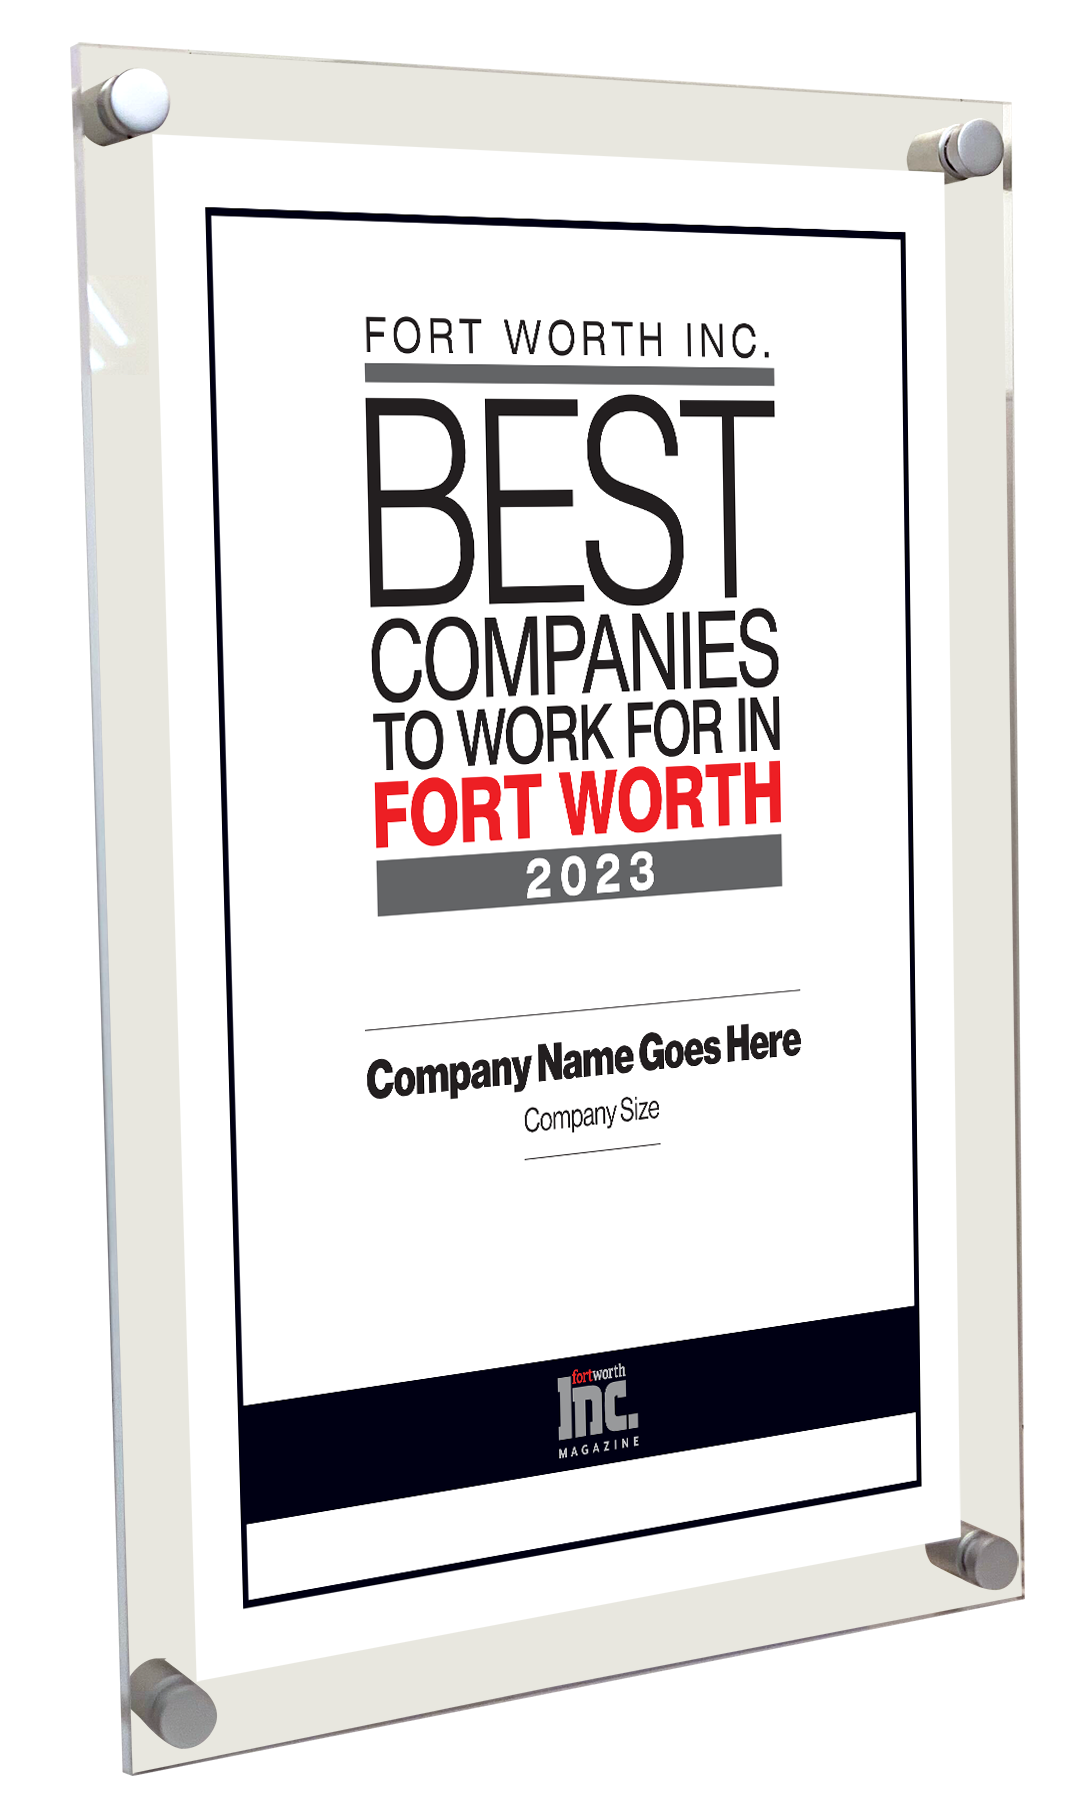 Fort Worth Inc. Best Companies to Work For Award Acrylic Plaque